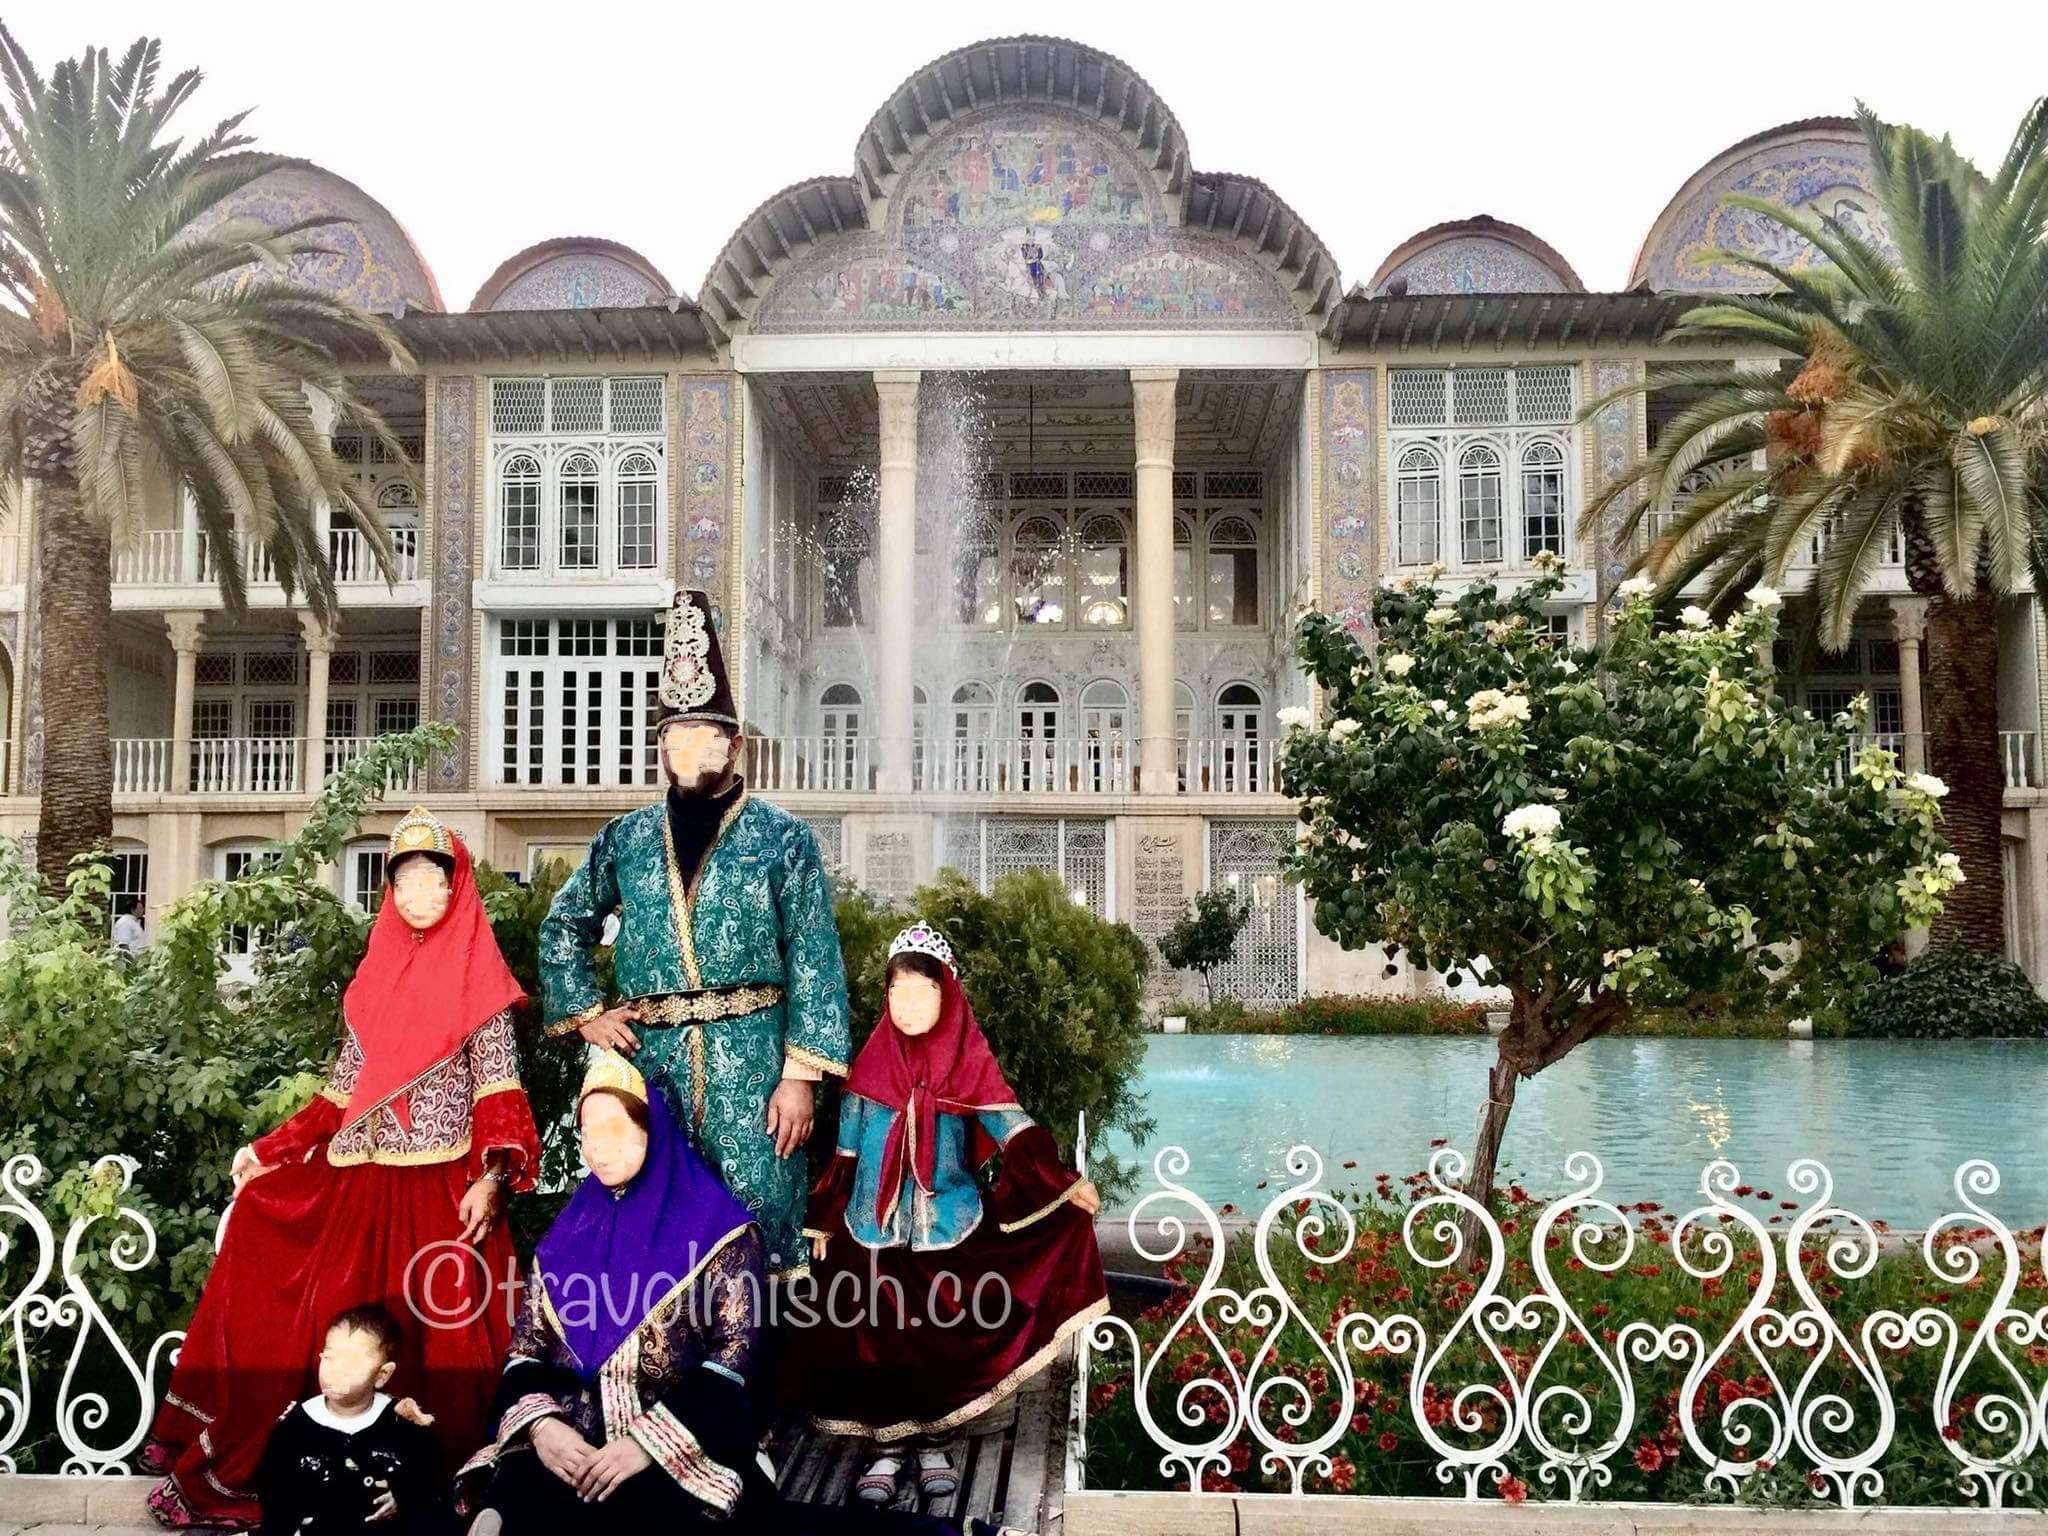 A beautiful family shot at Eram garden with their traditional dresses.